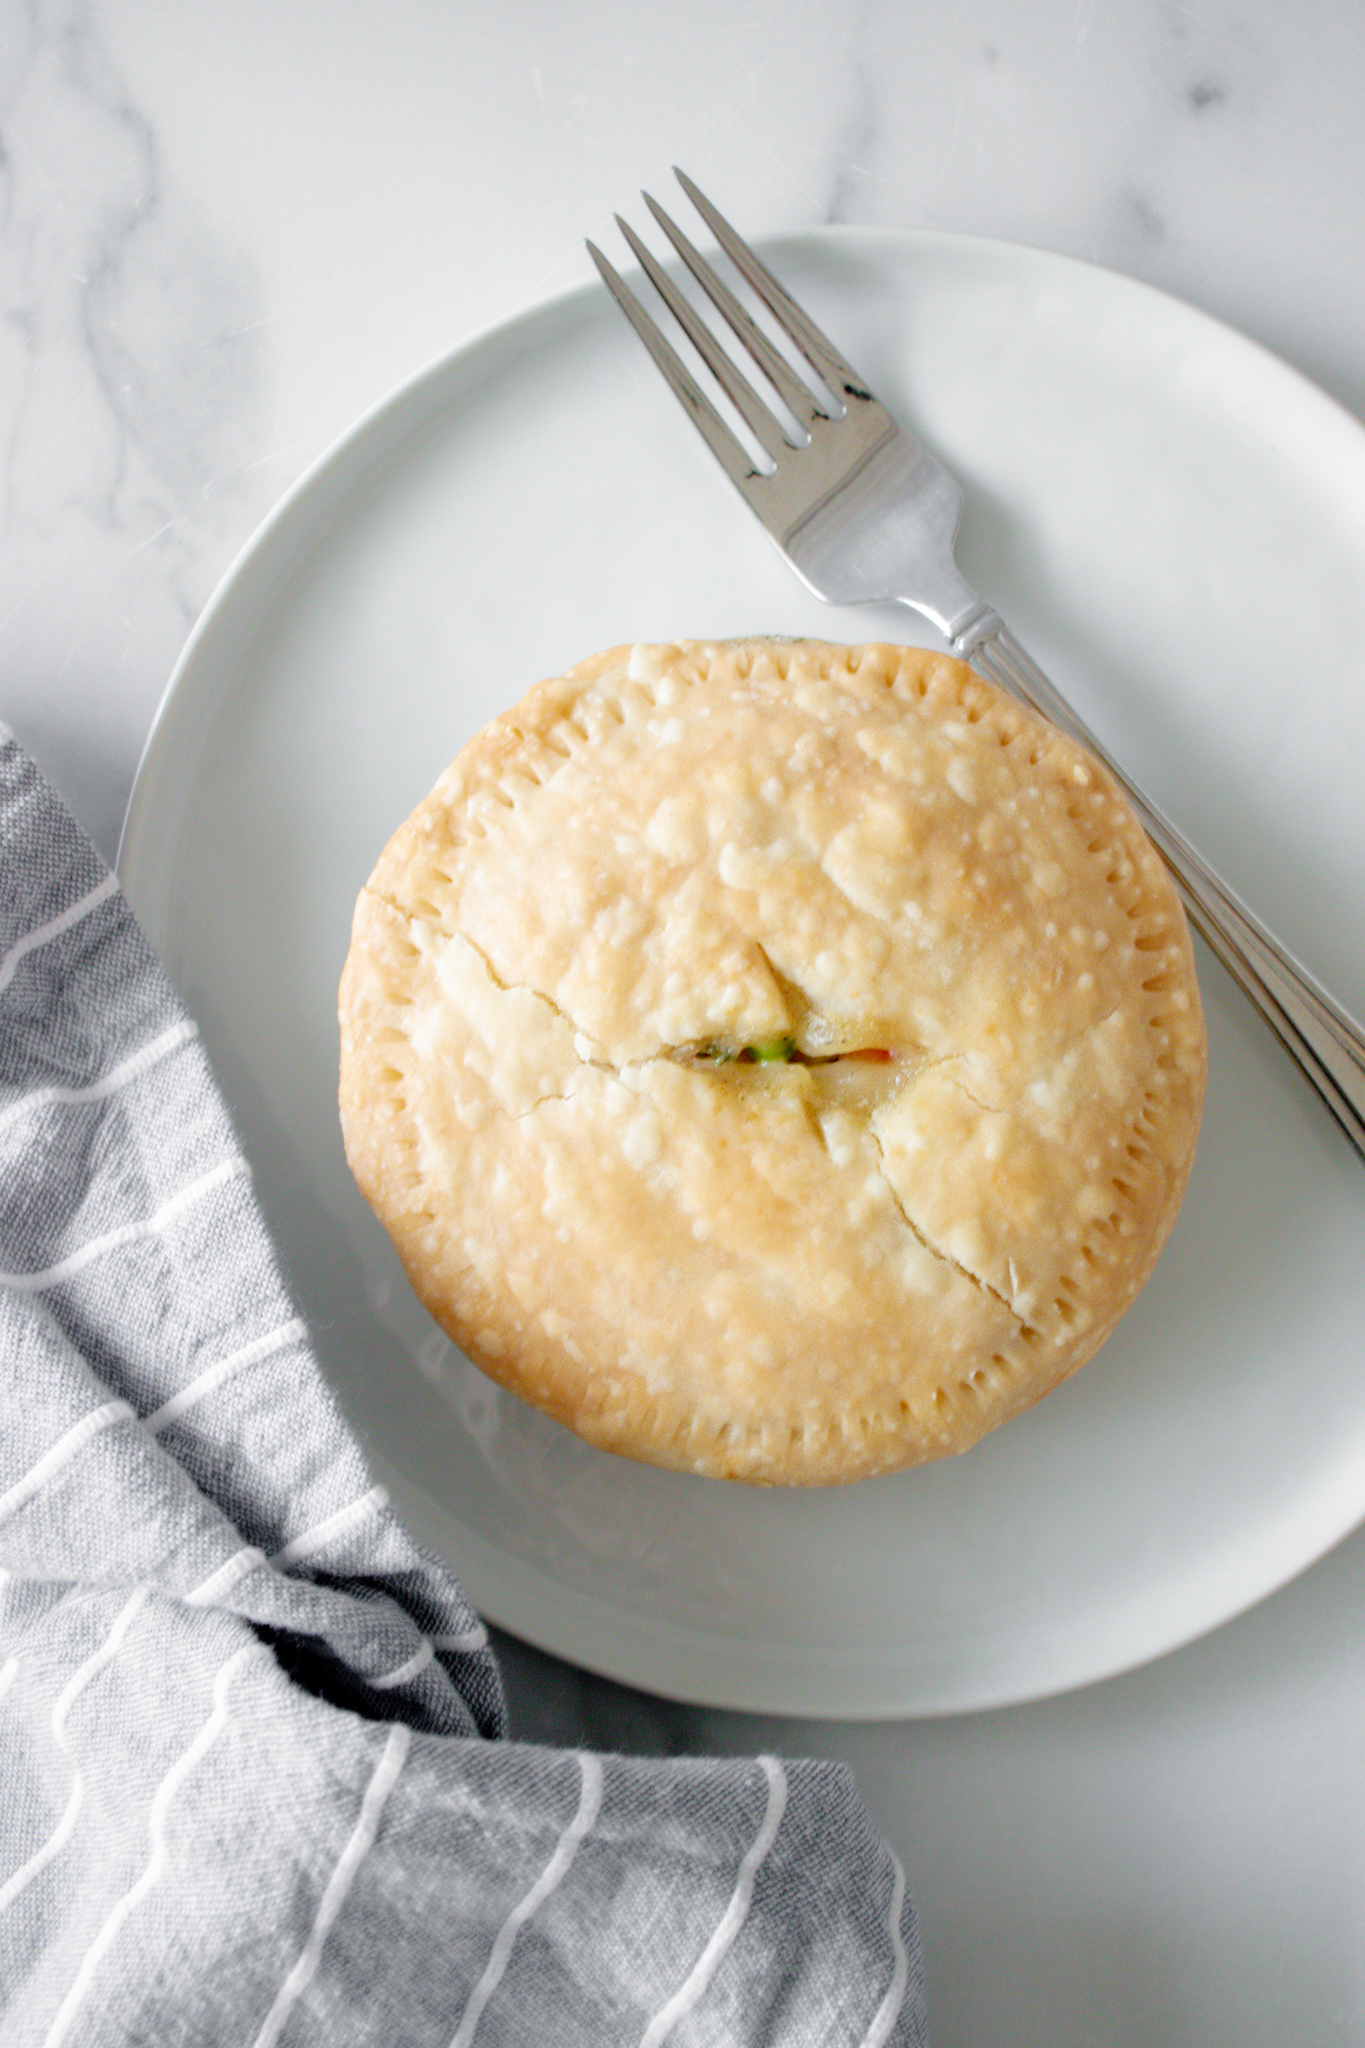 A white plate with a single chicken pot pie with a metal fork and a gray and white towel.